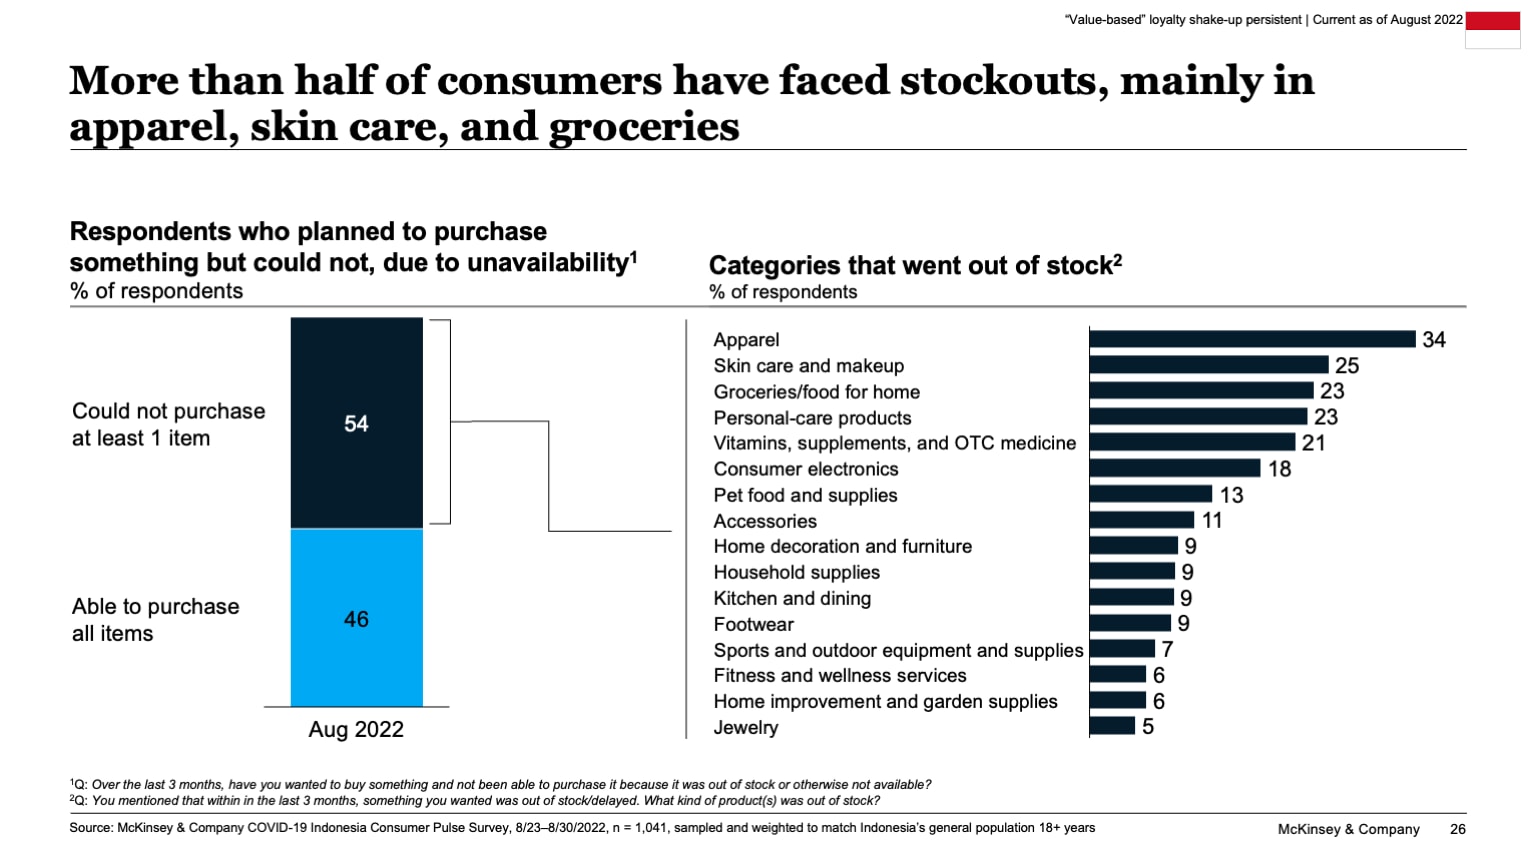 More than half of consumers have faced stockouts, mainly in apparel, skin care, and groceries